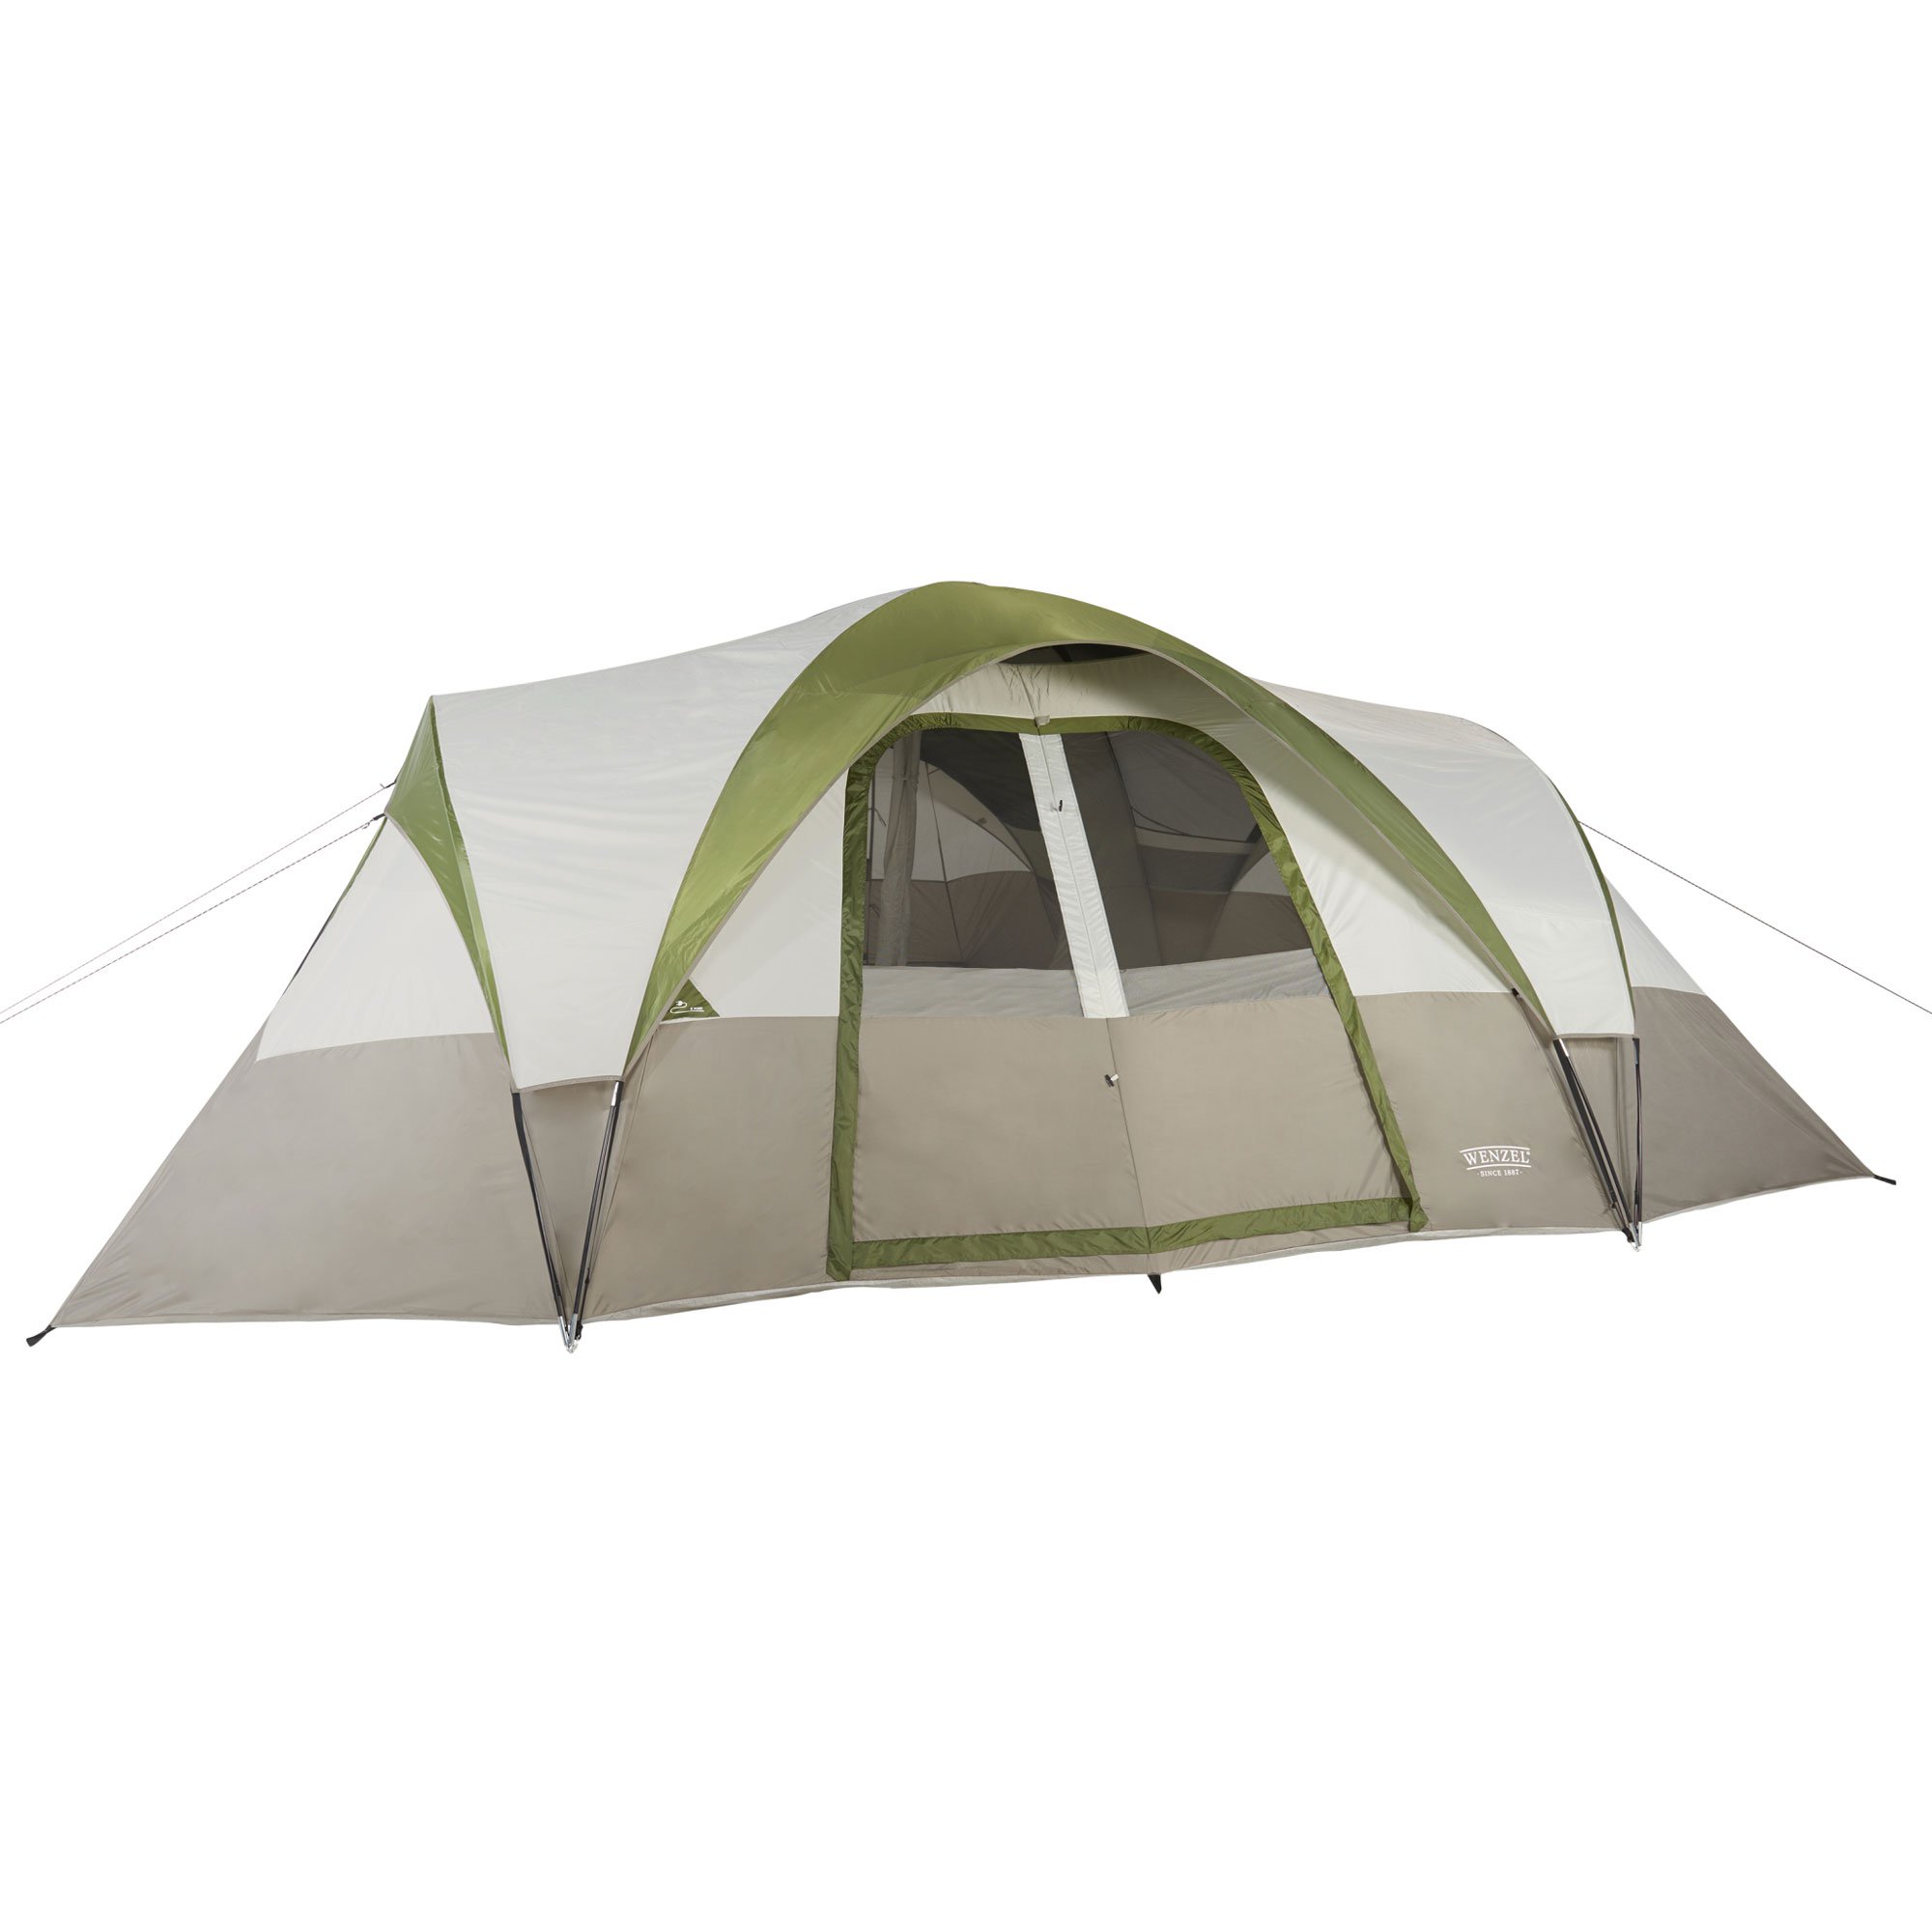 Wenzel Mammoth 16 Person Family 3 Season Outdoor Camping Dome Tent with Divider